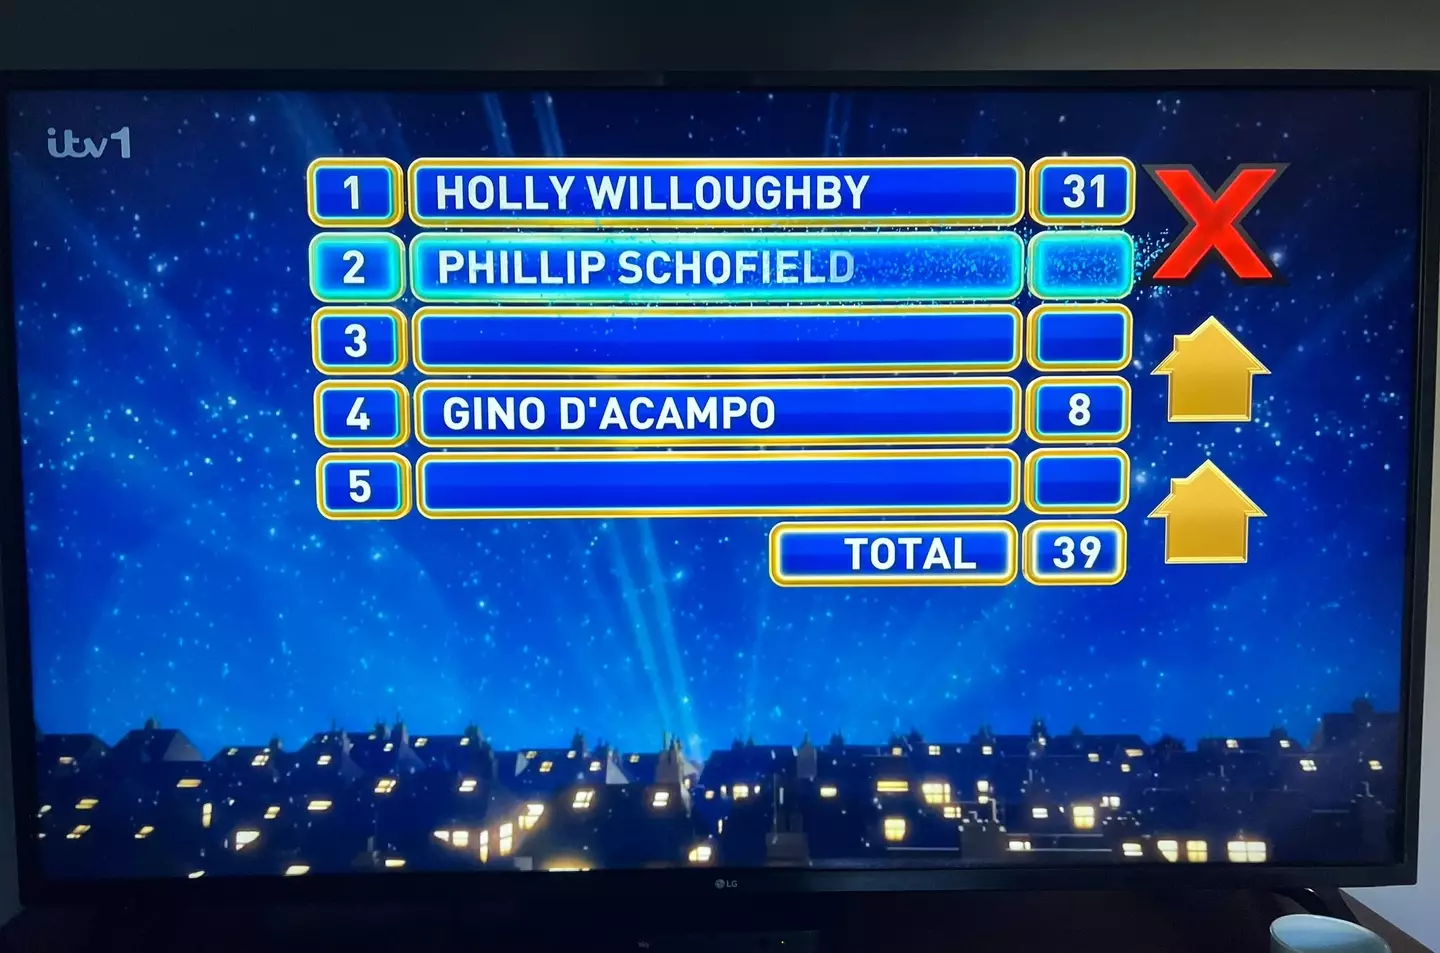 Awkwardly, one of the answers was the recently-departed Phillip Schofield.